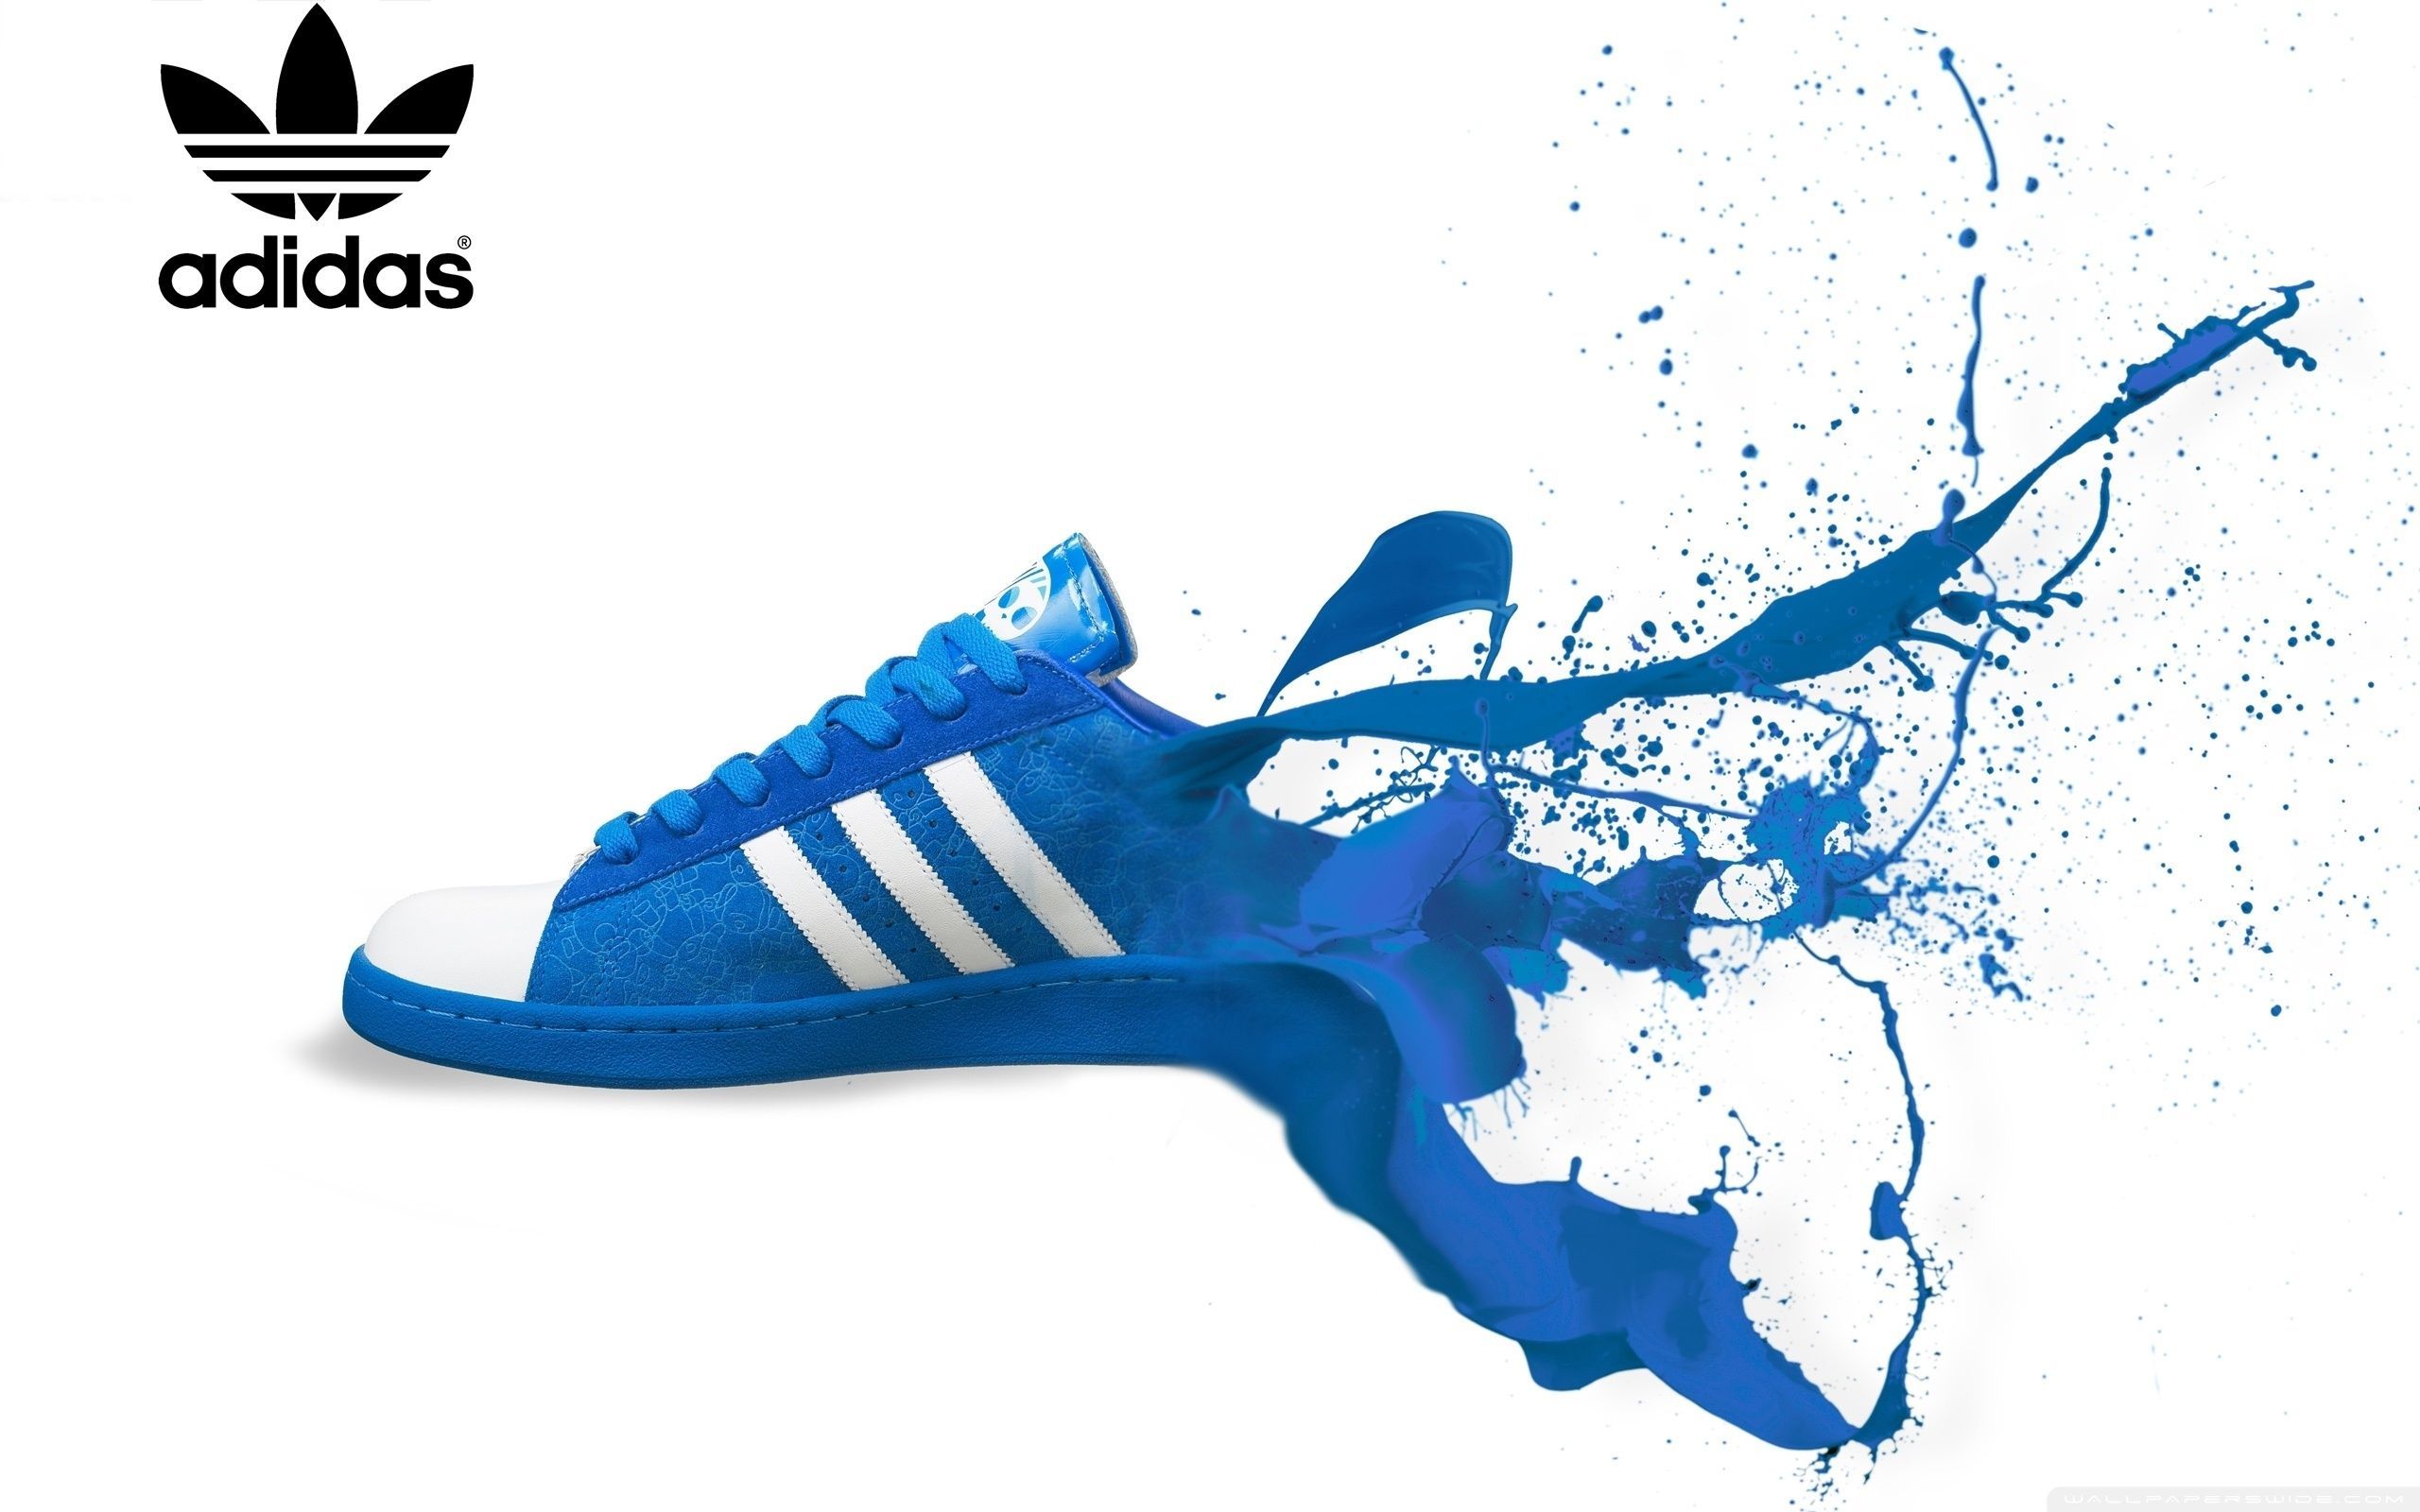 Adidas. Shoes ads, Adidas wallpaper, Shoe poster